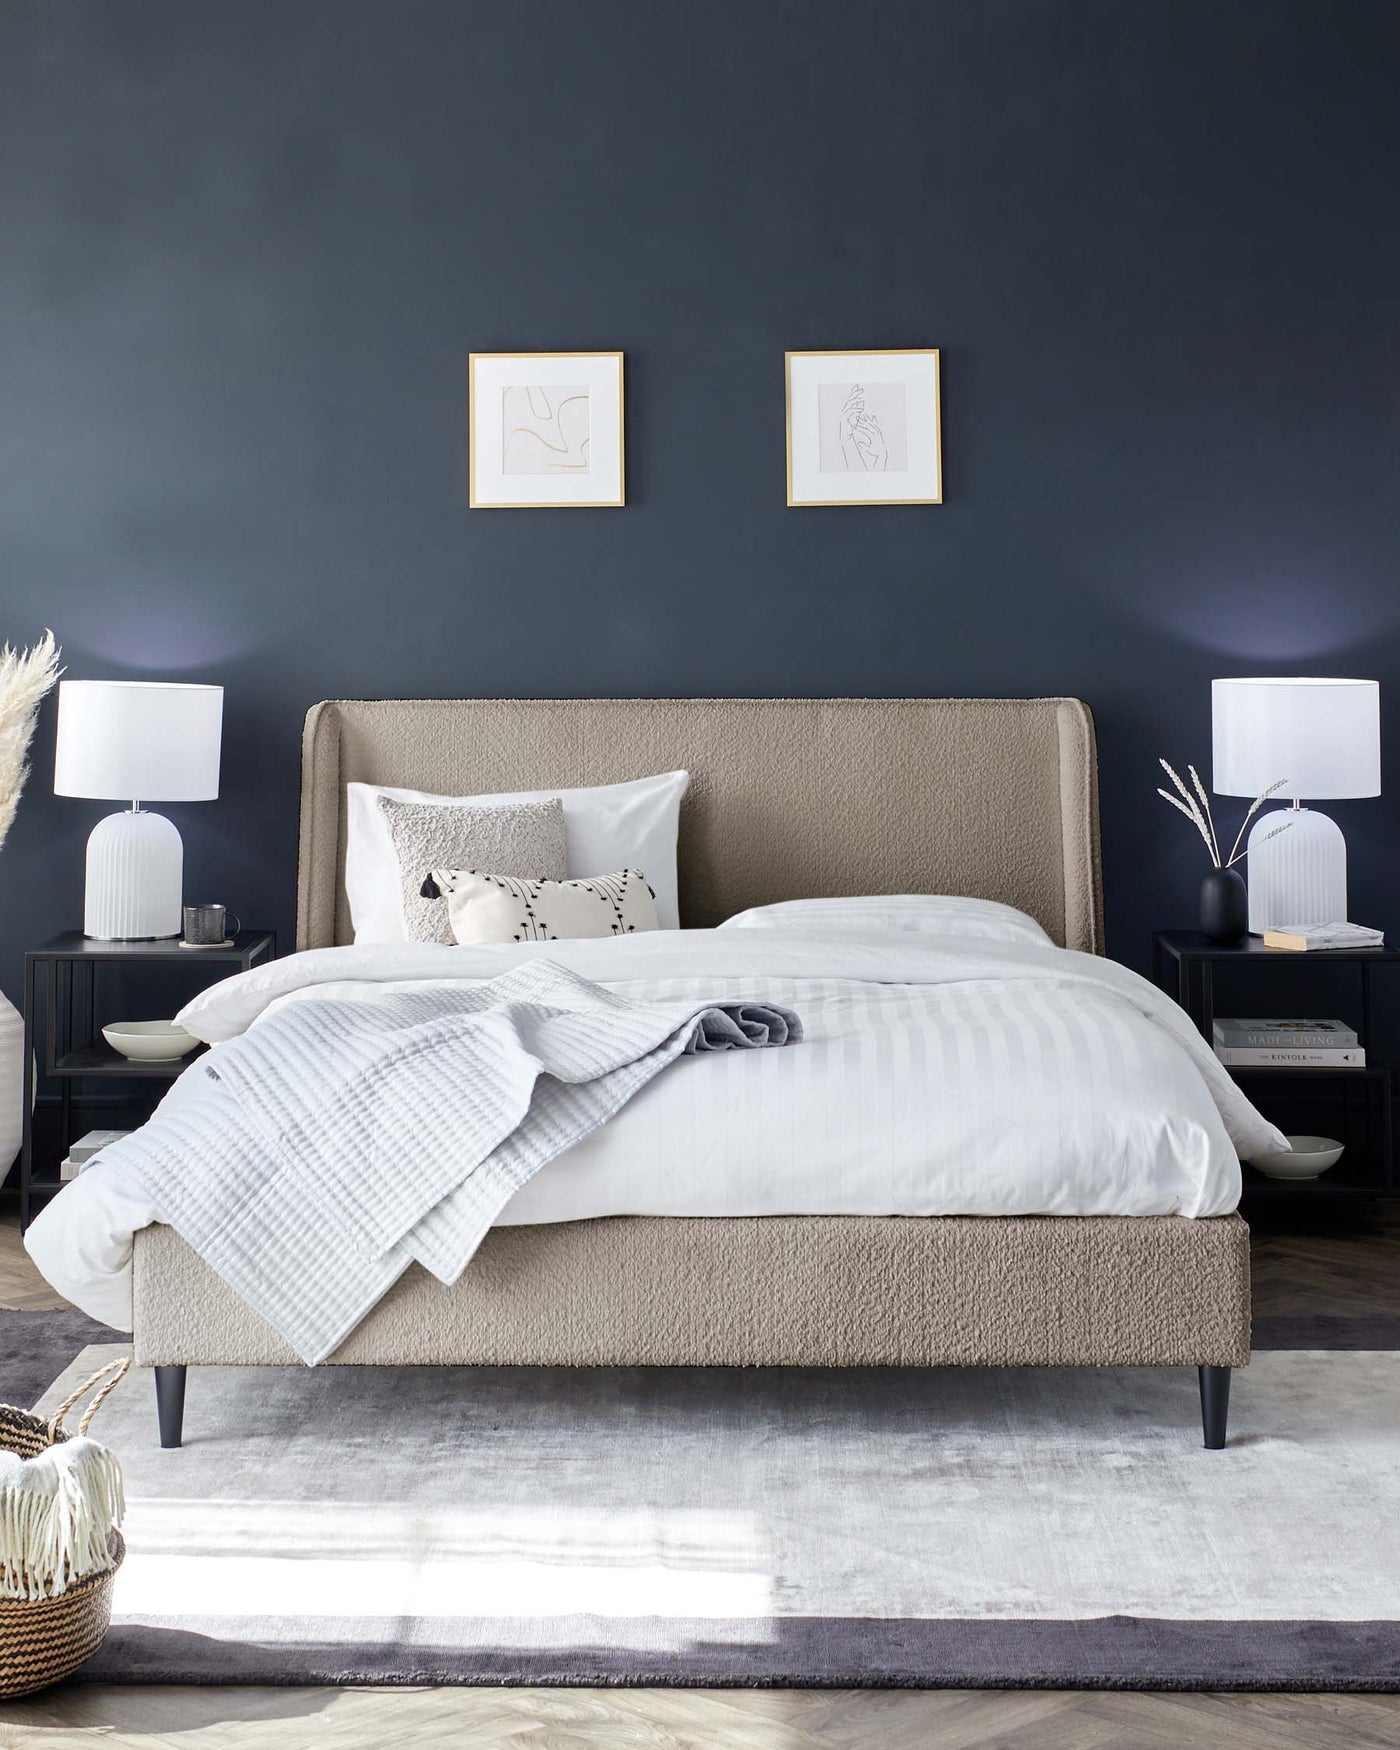 Modern bedroom featuring an upholstered platform bed in a neutral beige fabric with a high, cushioned headboard and dark tapered legs. Coordinating bedside tables in black with elegant white table lamps, and a soft grey floor rug complete the contemporary aesthetic.